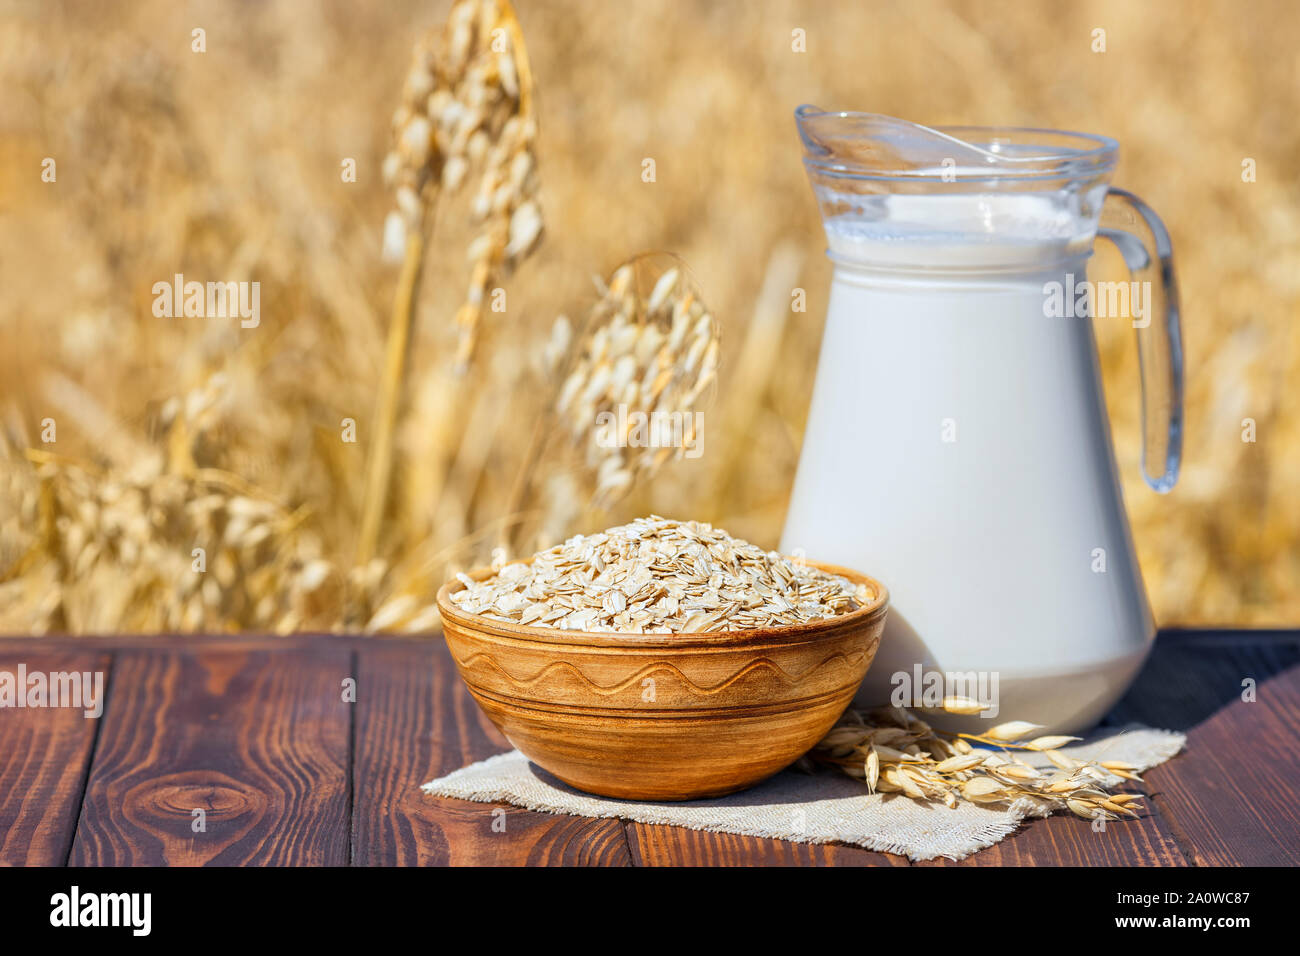 vegan oat milk in glass jug with uncooked oatmeal in bowl on table over against ripe cereal field Stock Photo